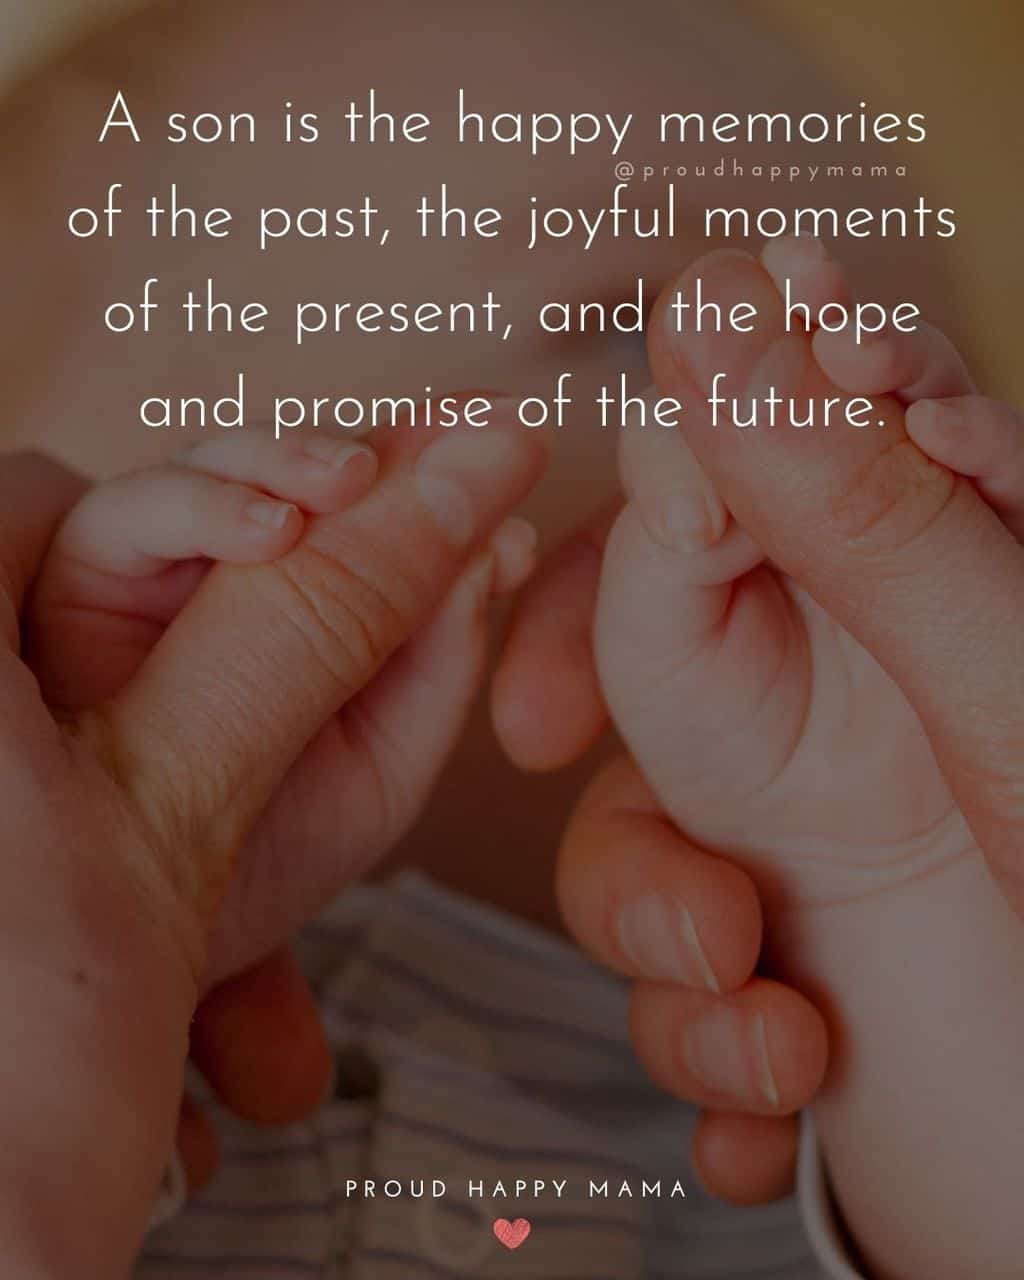 Son Quotes - A son is the happy memories of the past, the joyful moments of the present, and the hope and promise of the